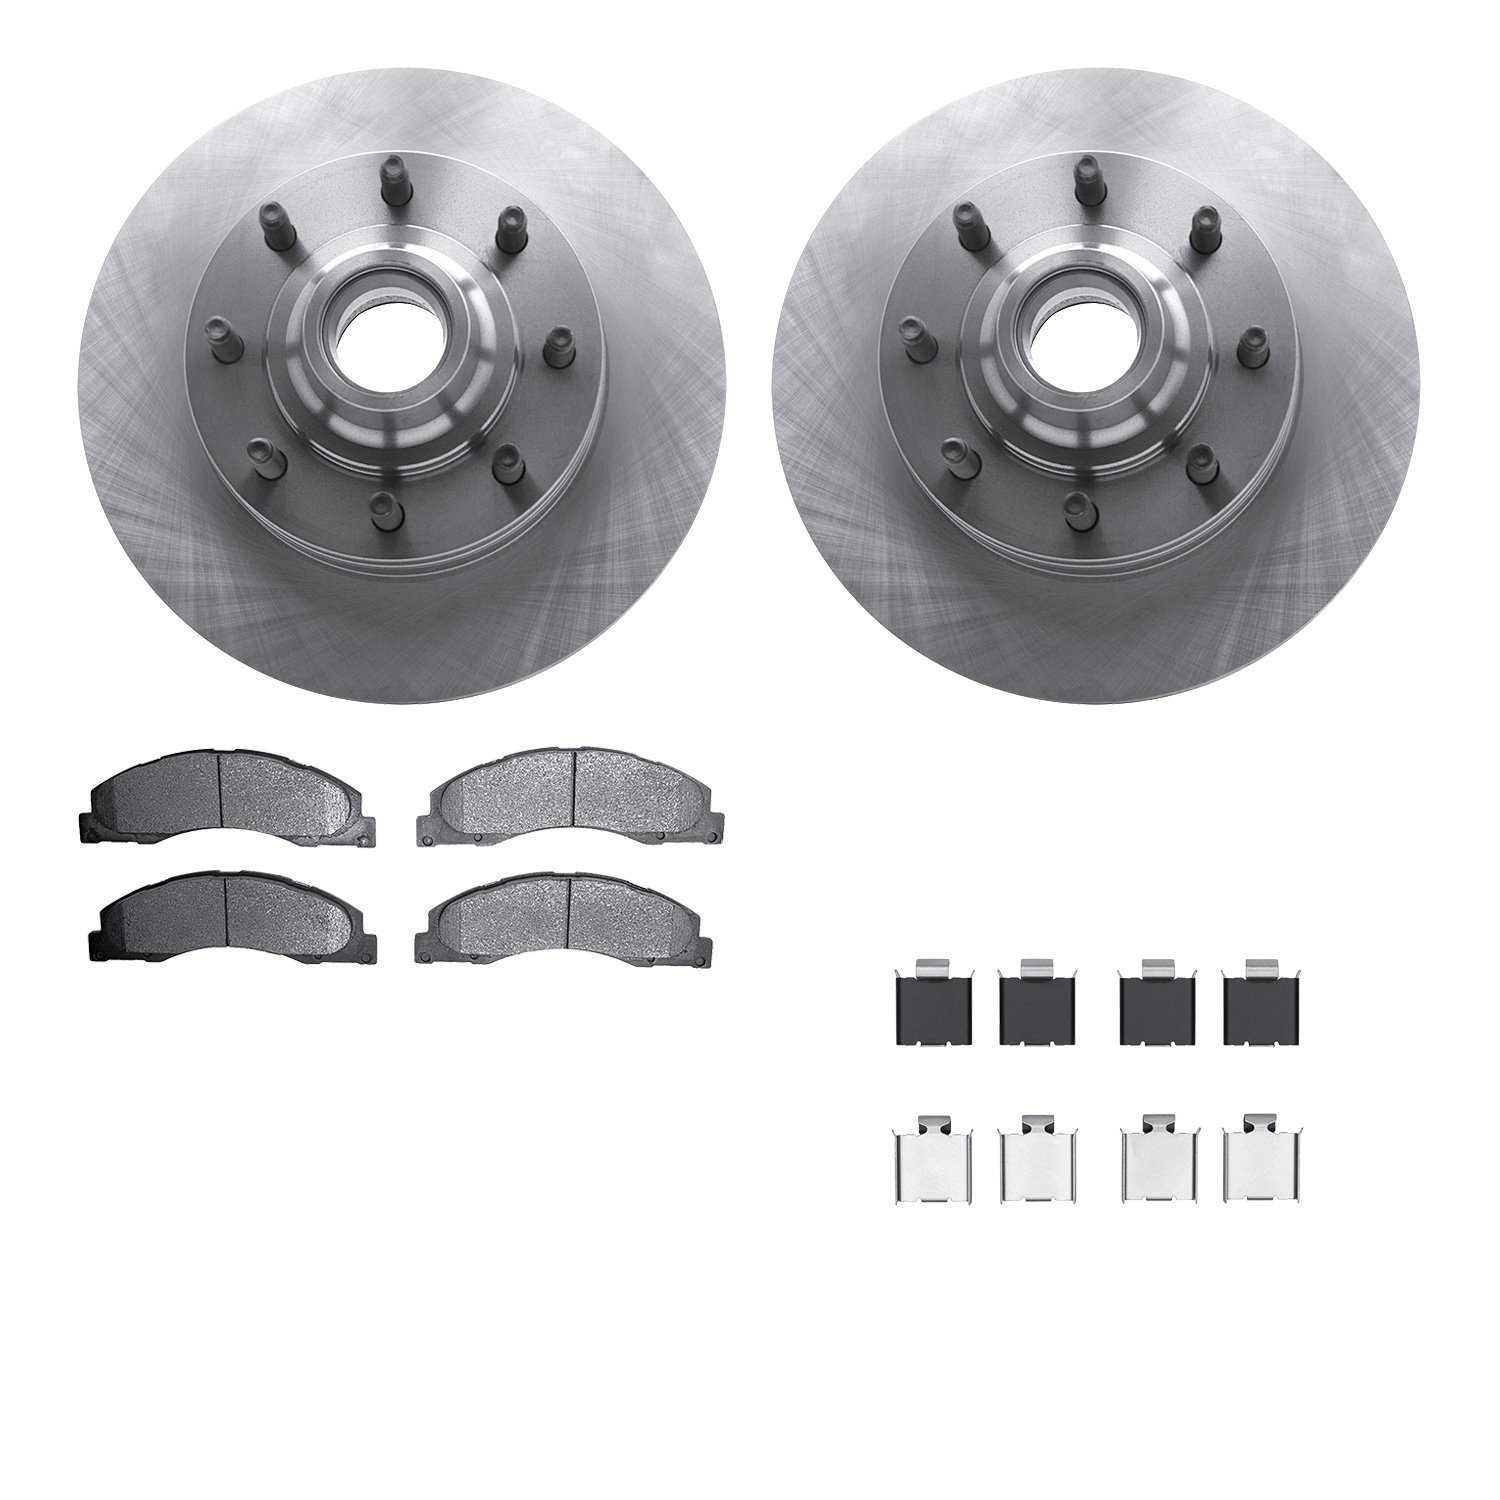 6212-99657 Brake Rotors w/Heavy-Duty Brake Pads Kit & Hardware, Fits Select Ford/Lincoln/Mercury/Mazda, Position: Front